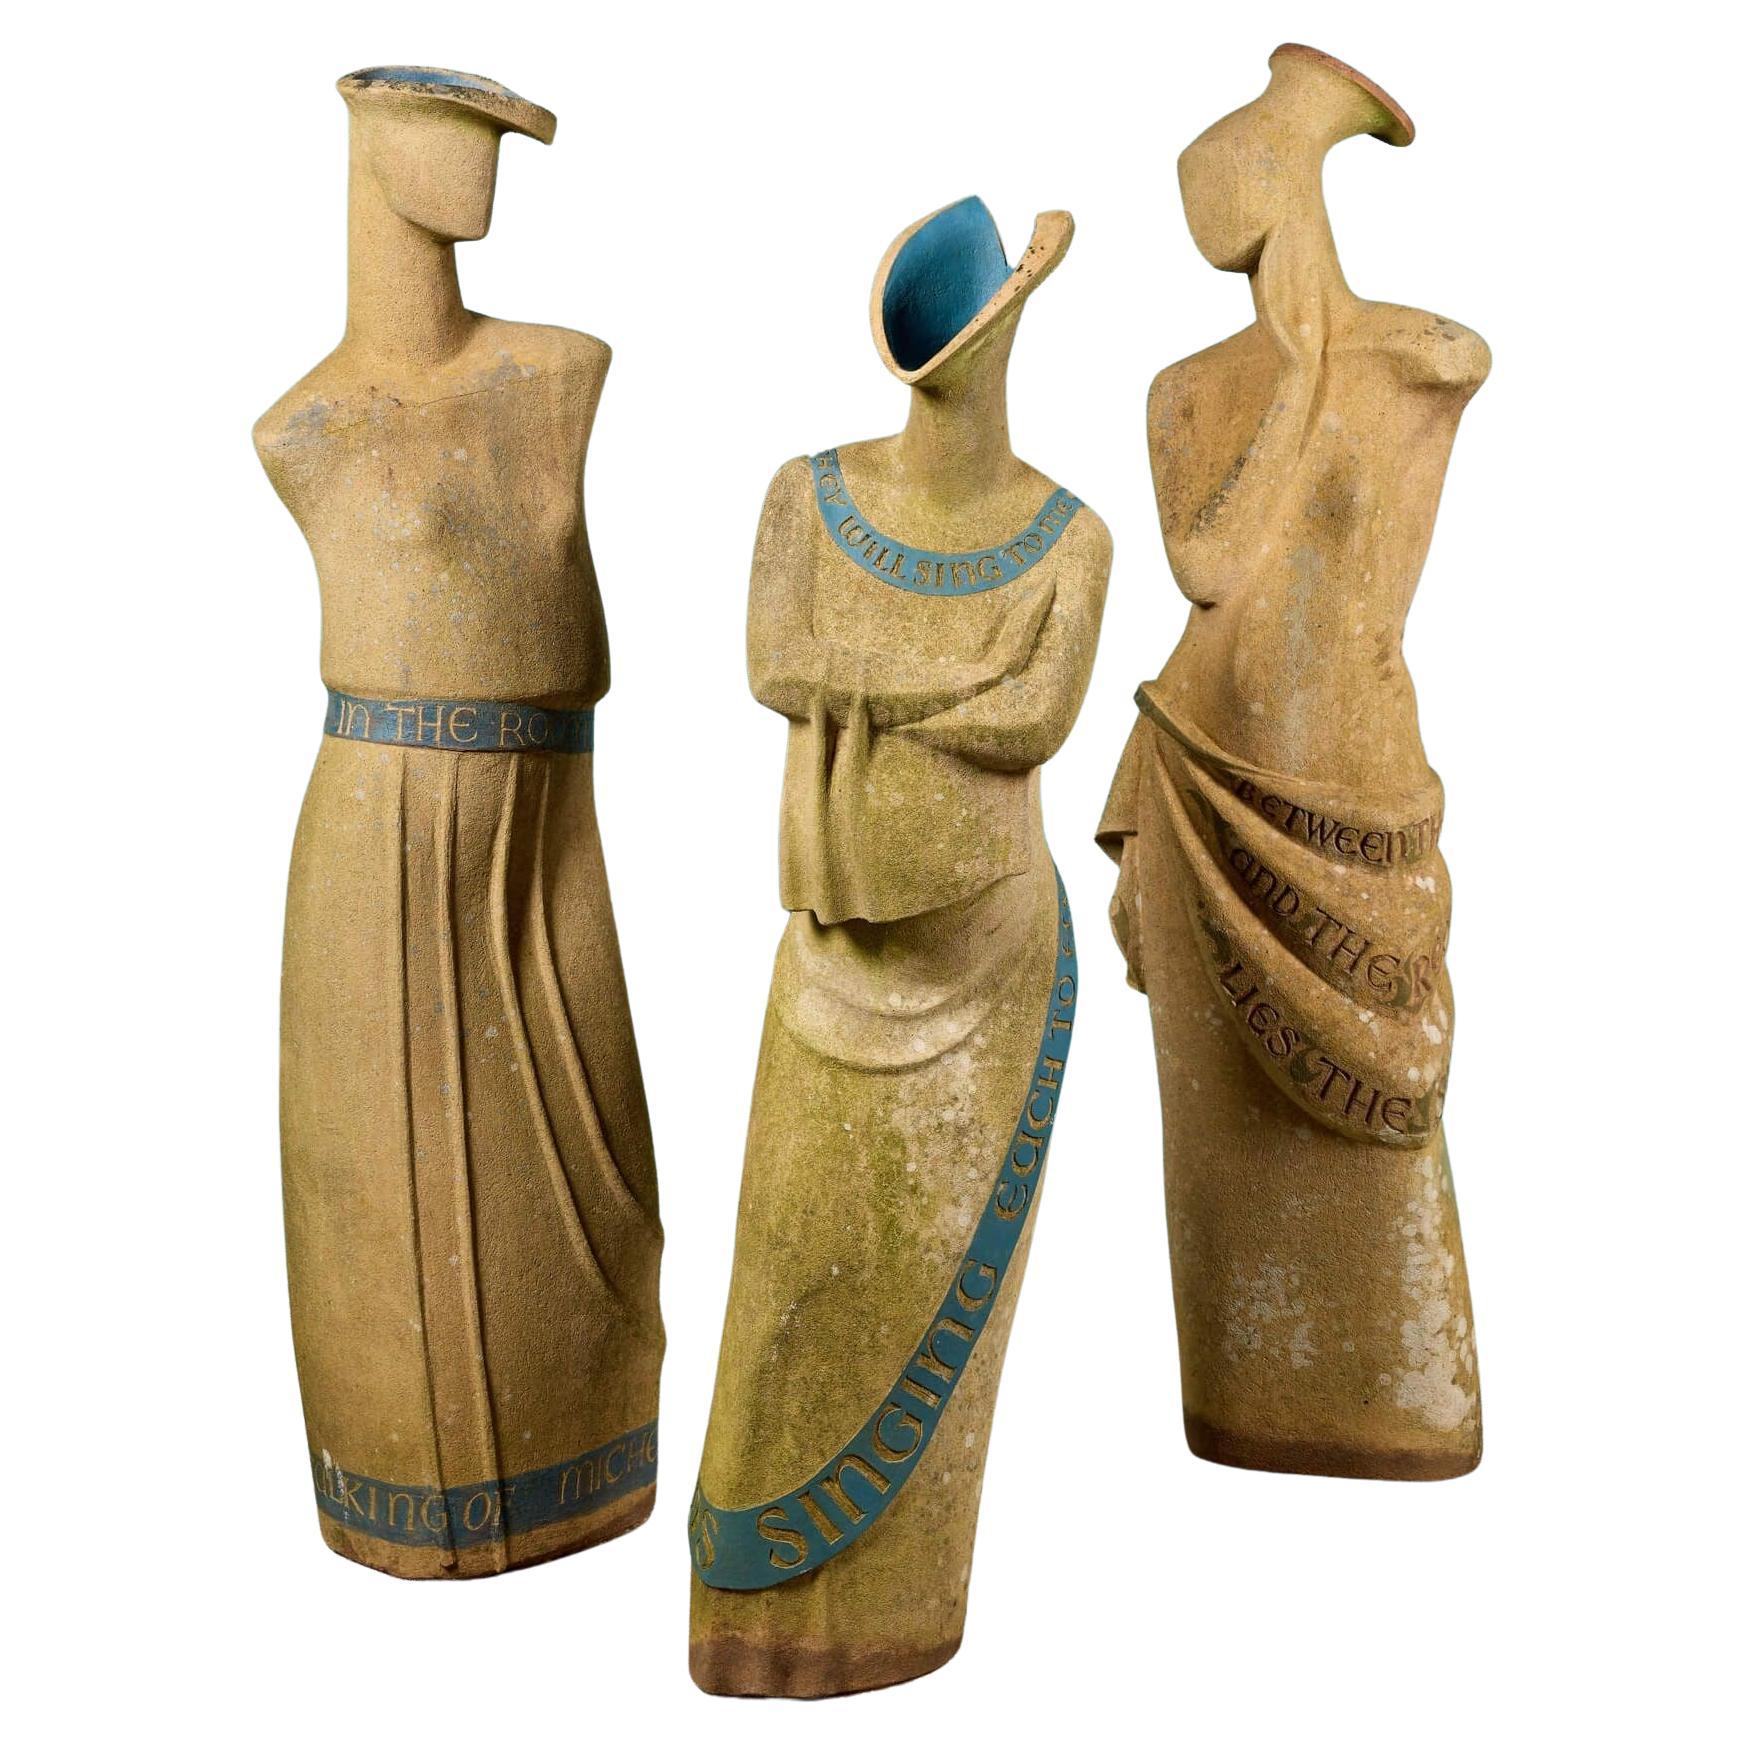 ‘The Gossips’ Set of 3 Life-size Figurative Statues For Sale